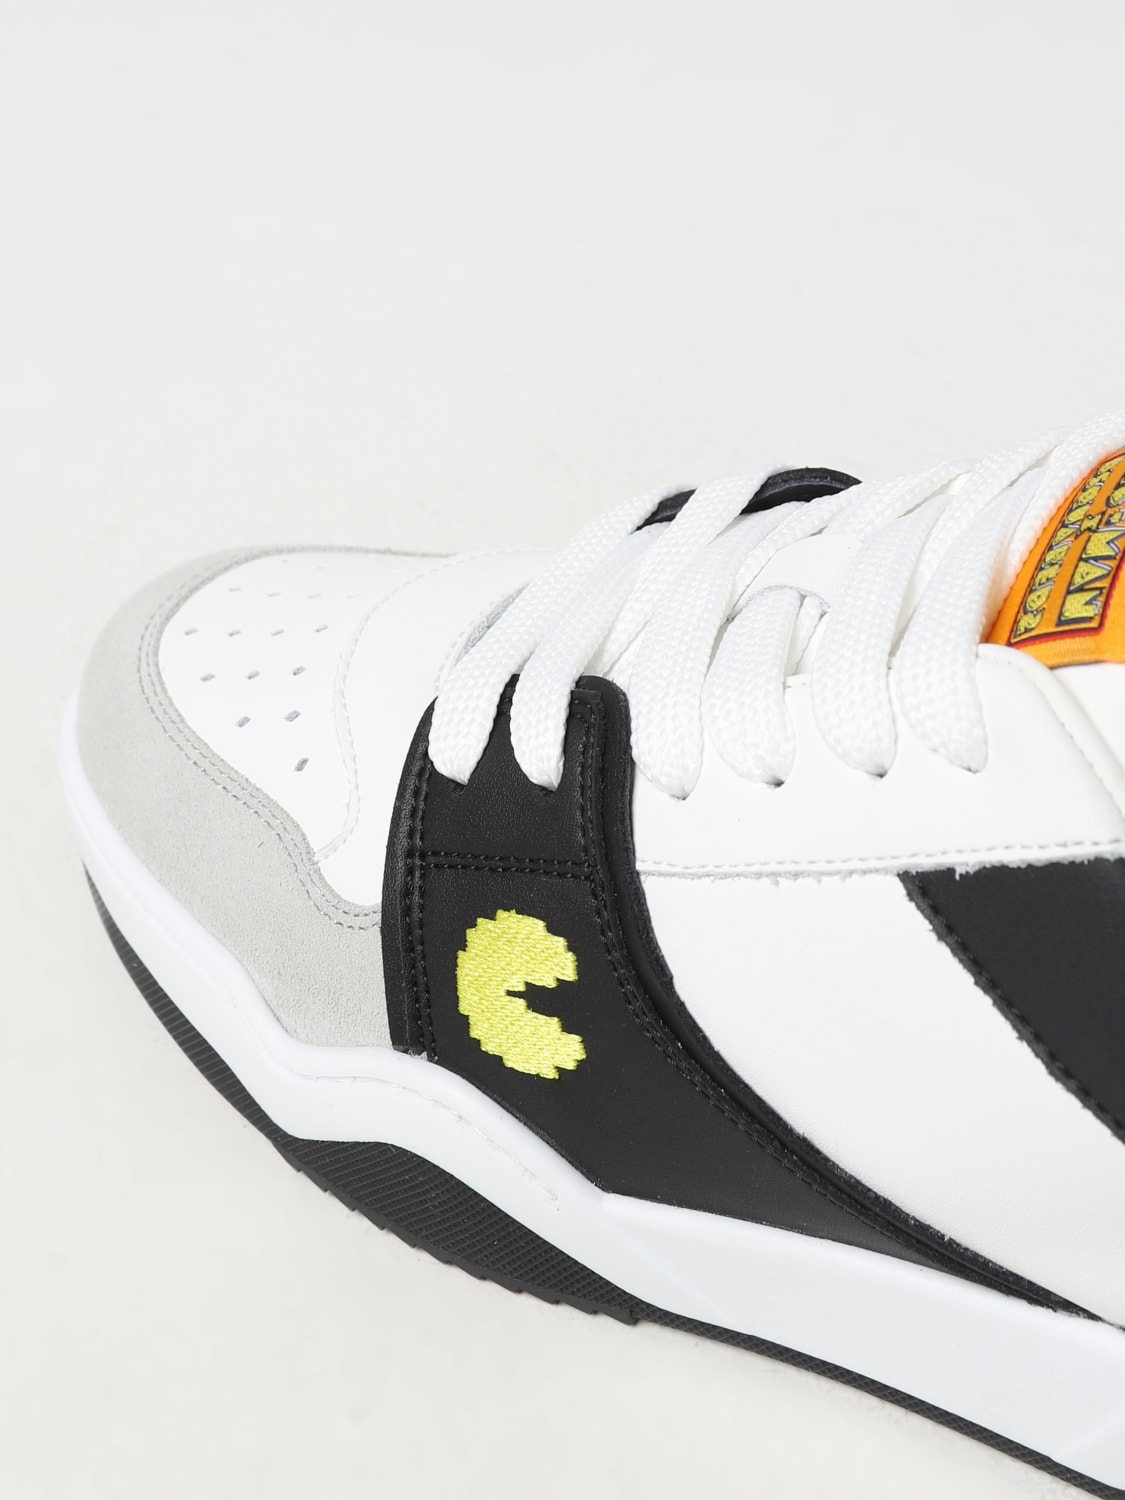 DSQUARED2 SNEAKERS: Sneakers Pac-Man™ x in pelle, Sneakers Dsquared2 uomo  - SNM032801501276 Bianco